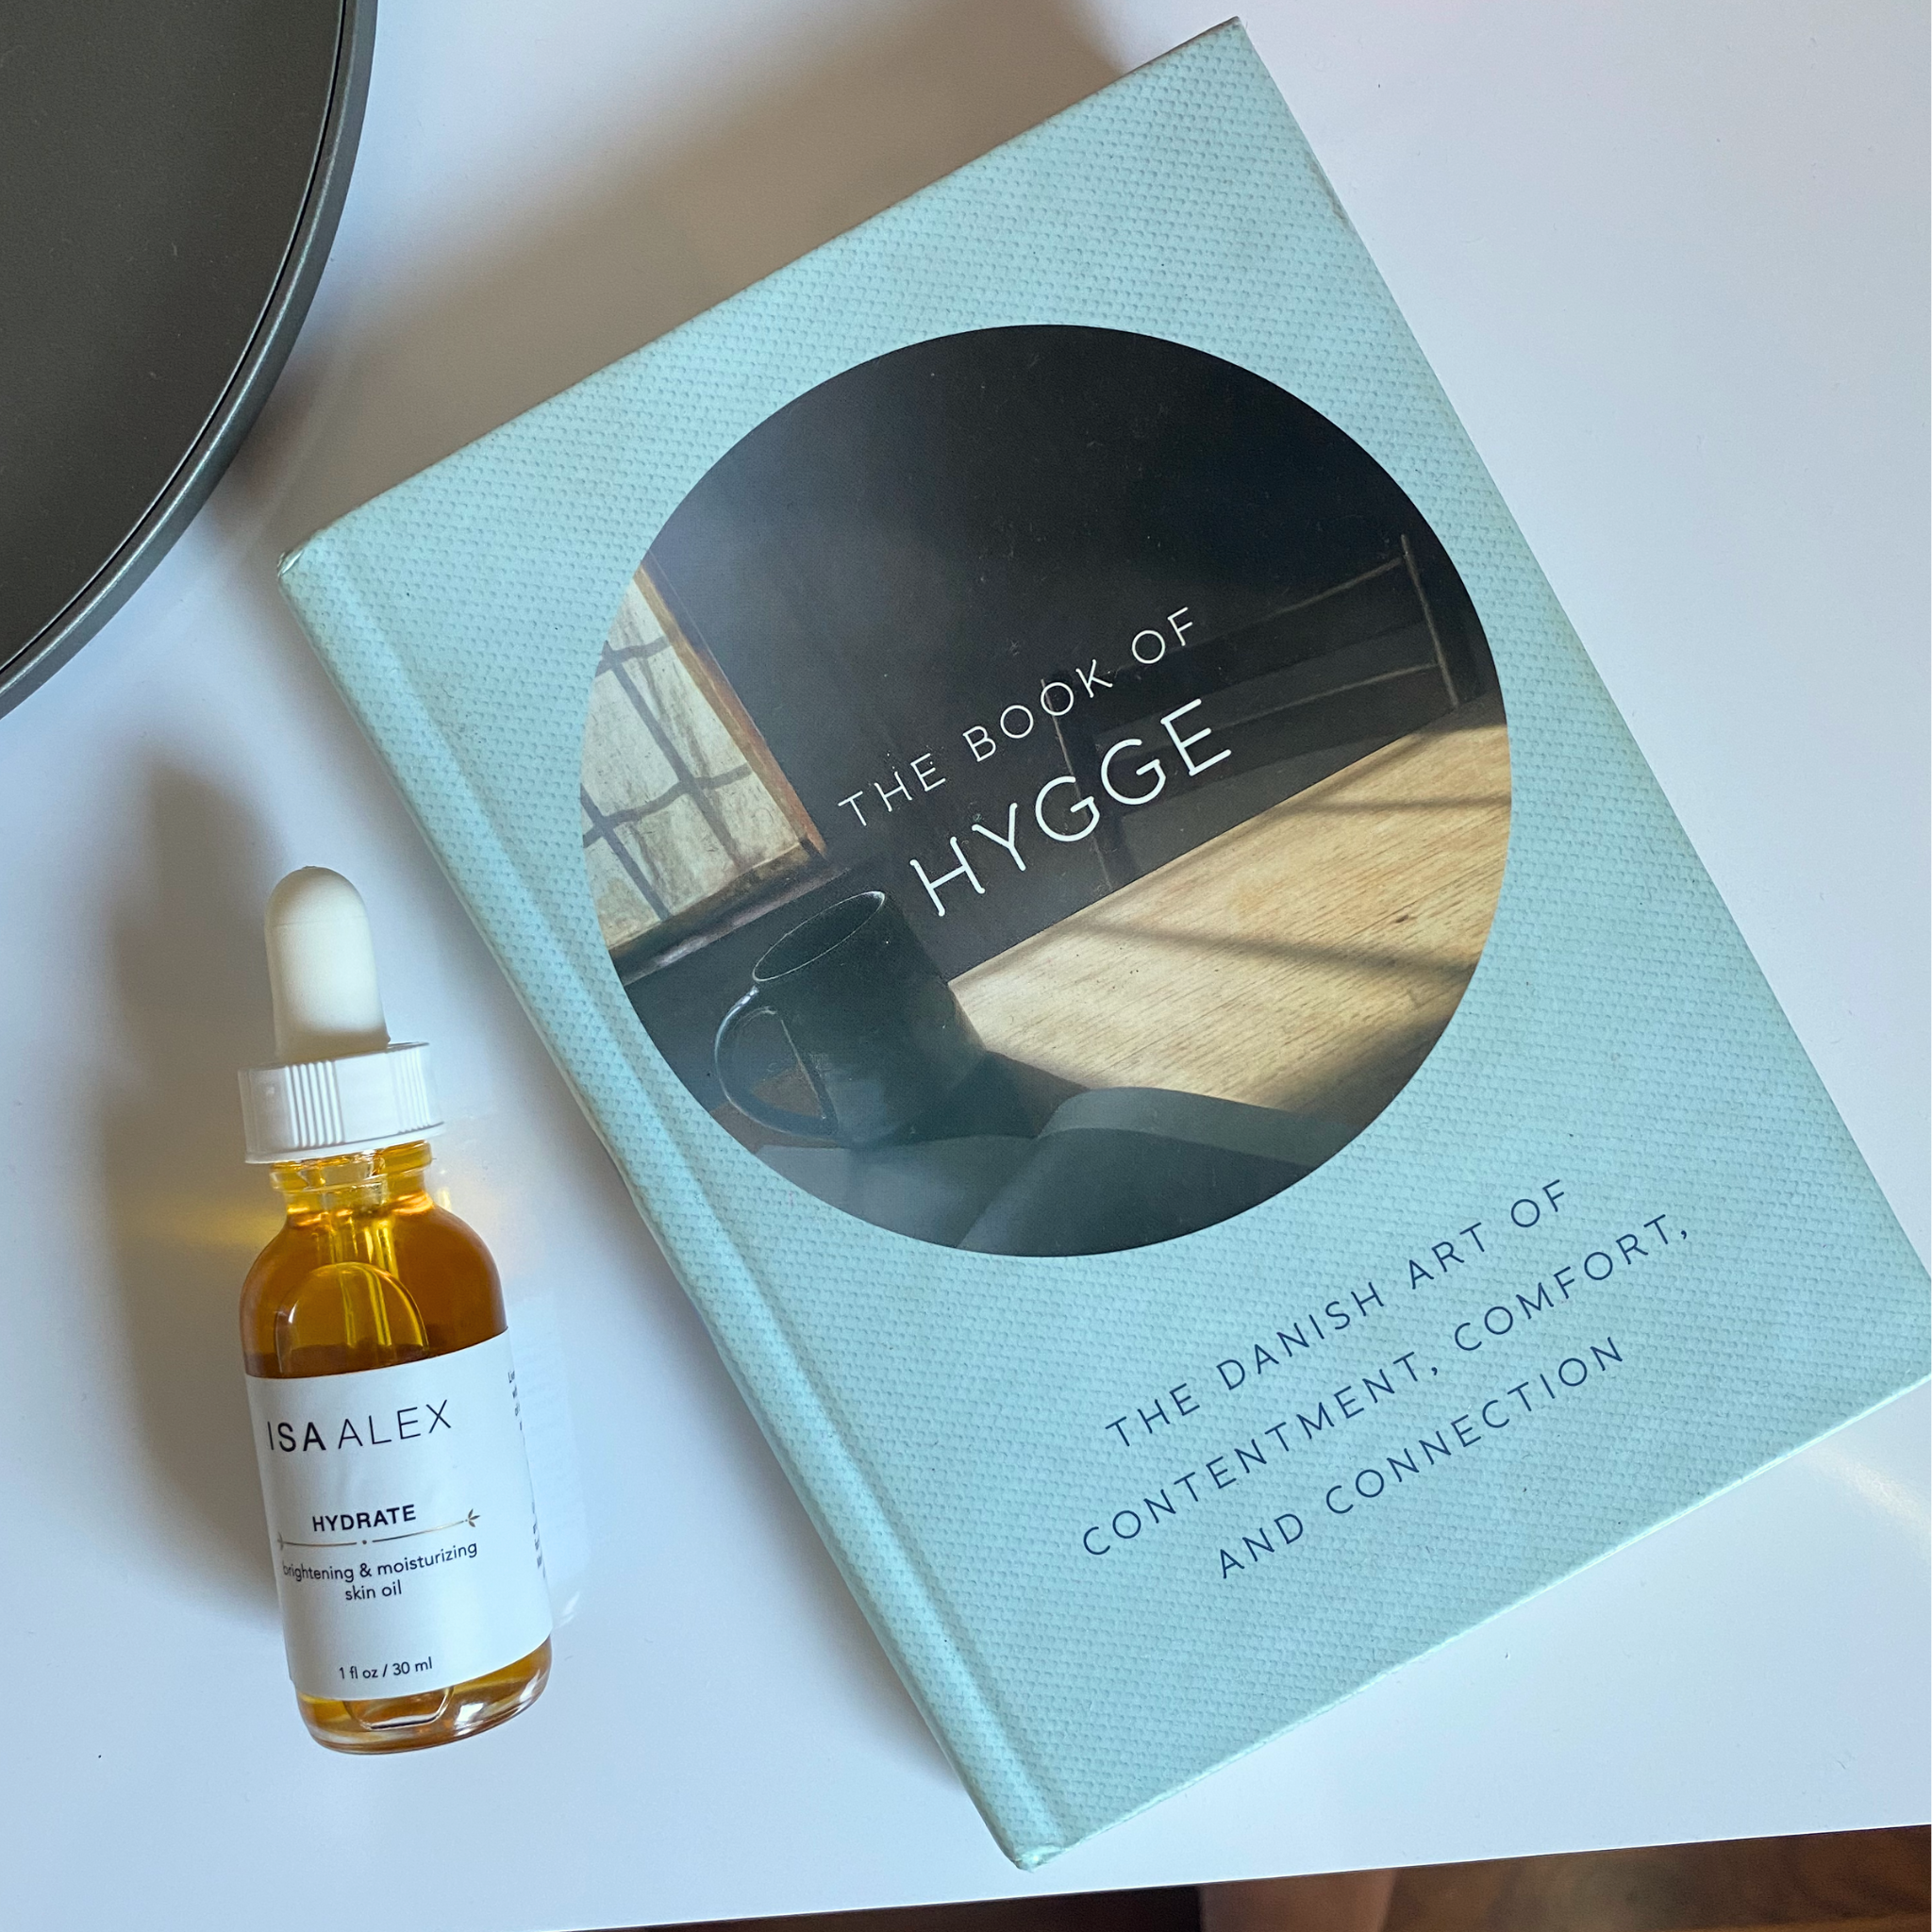 isa alex hydrate face oil on nightstand with the book of hygge the danish concept of contentment